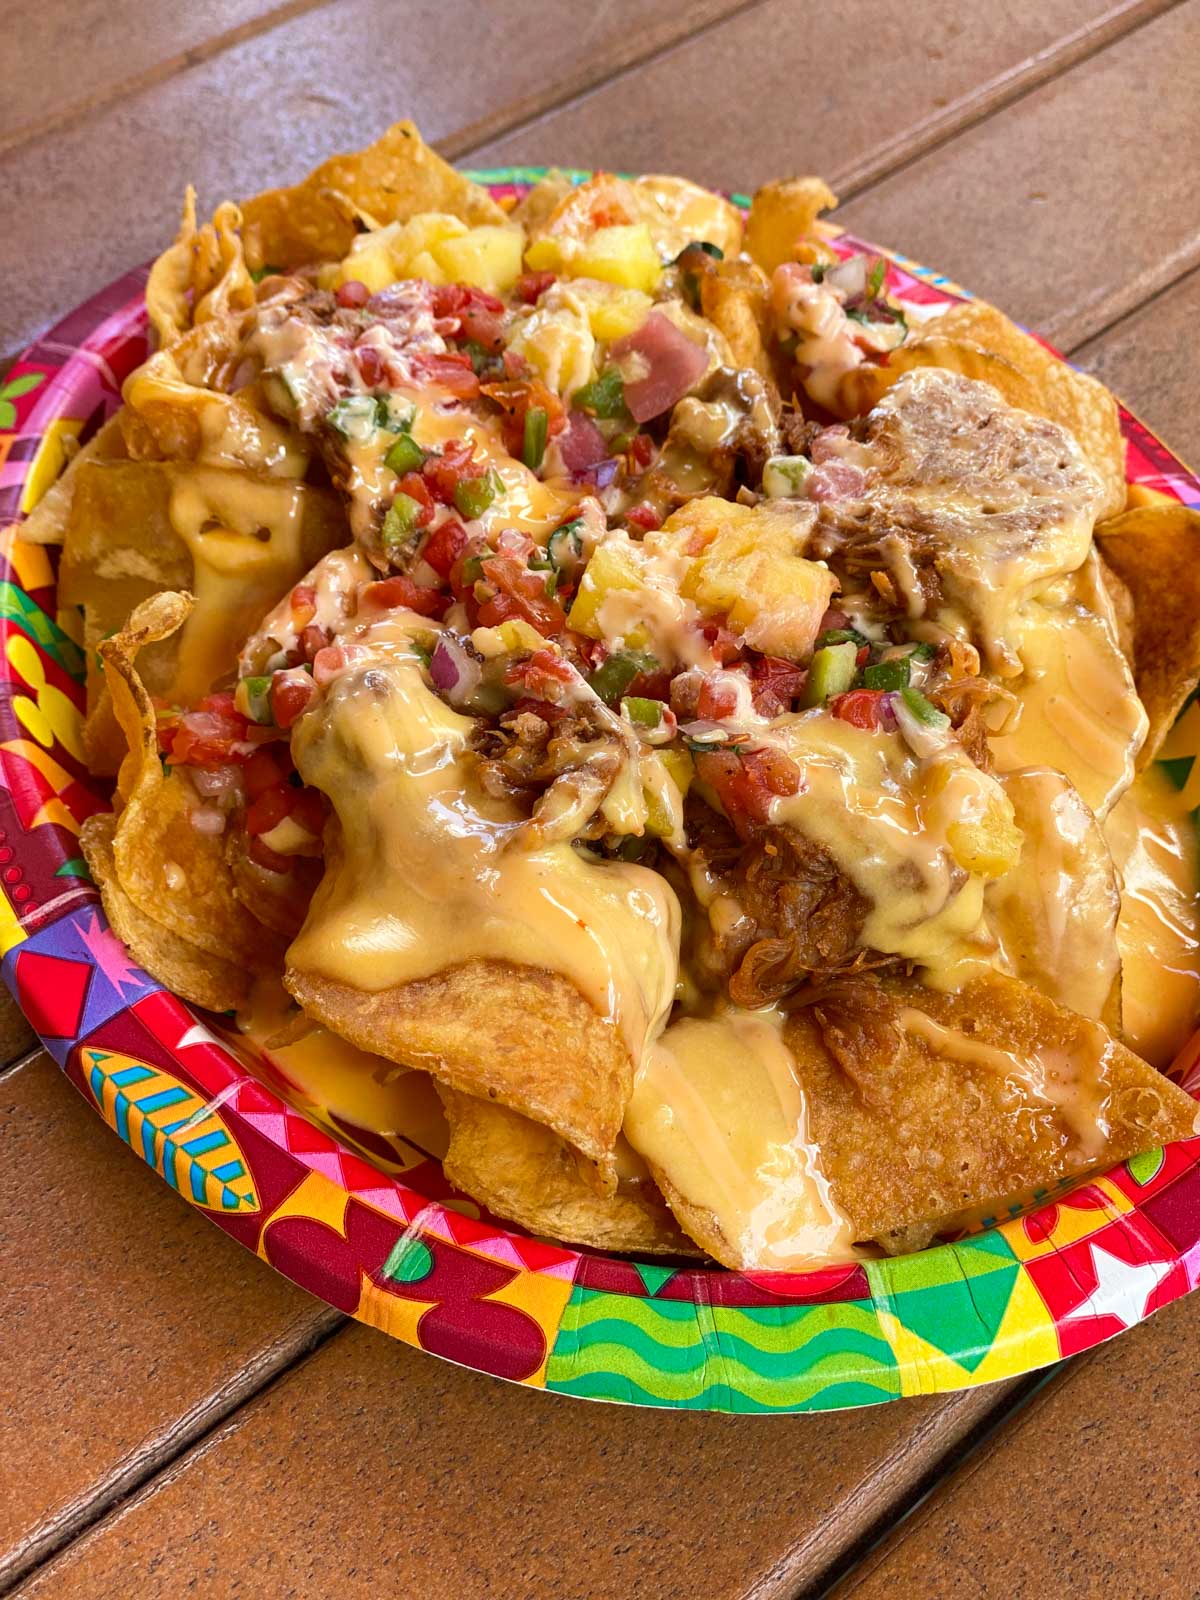 A tray of pork nachos has cheese melted all over the top.